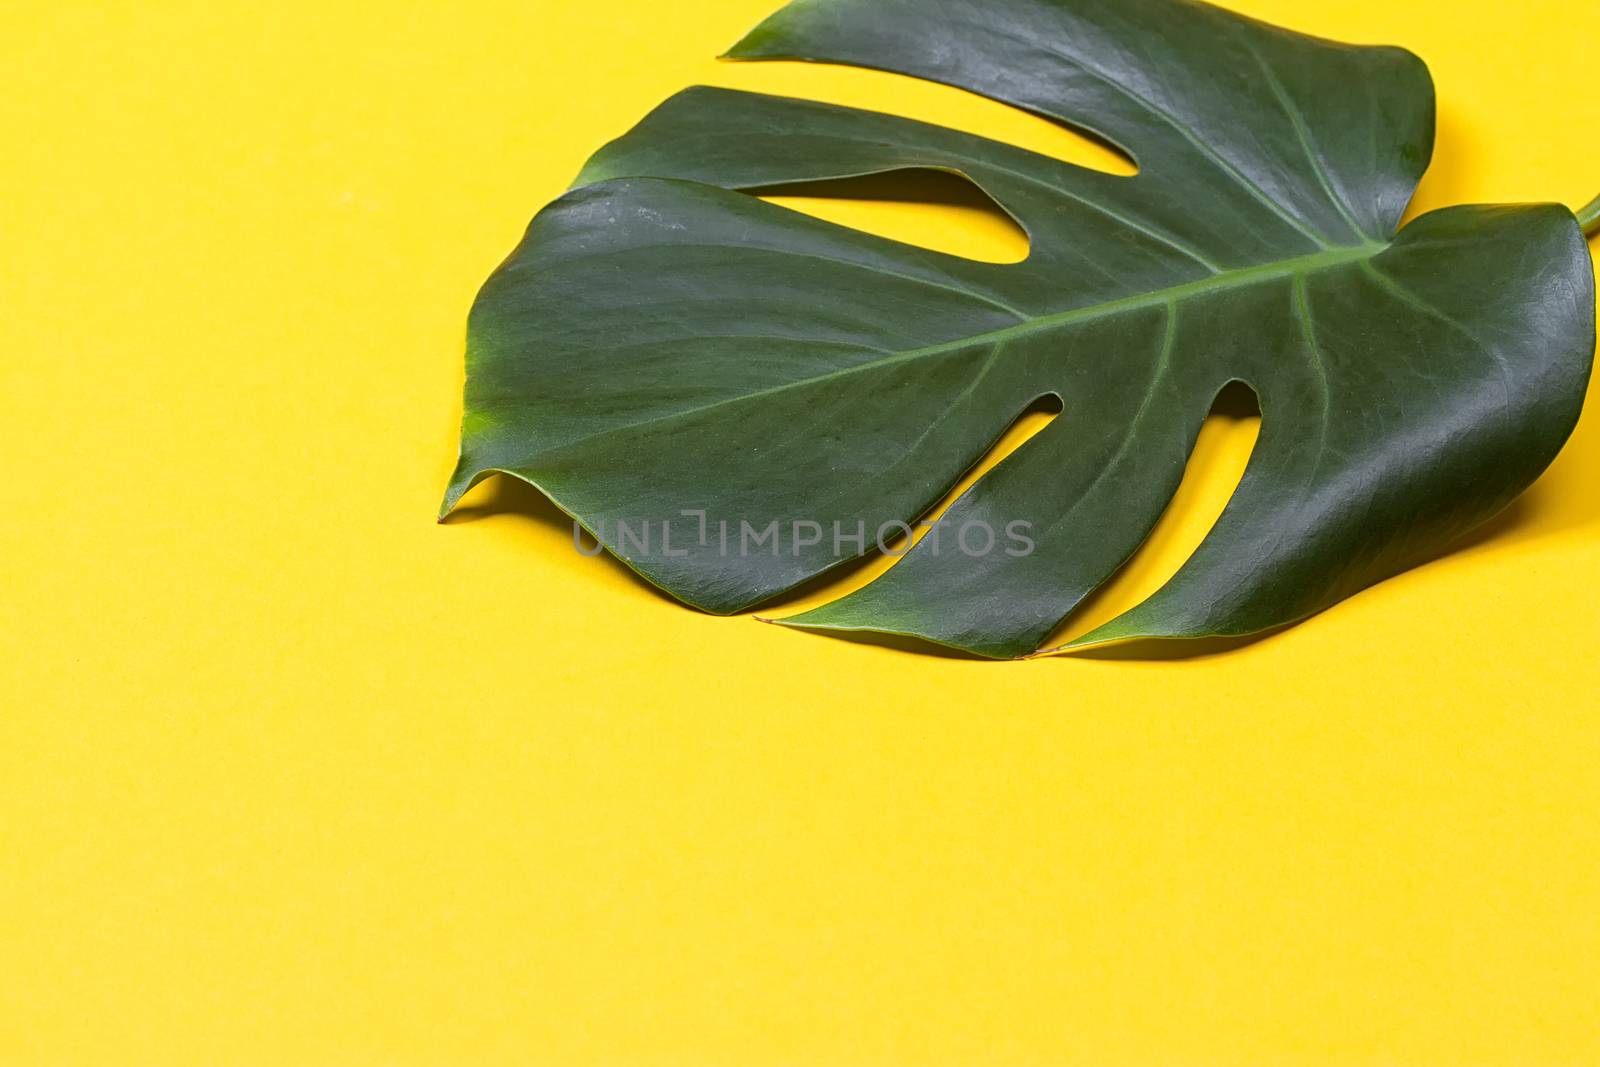 the monstera leaf by victosha